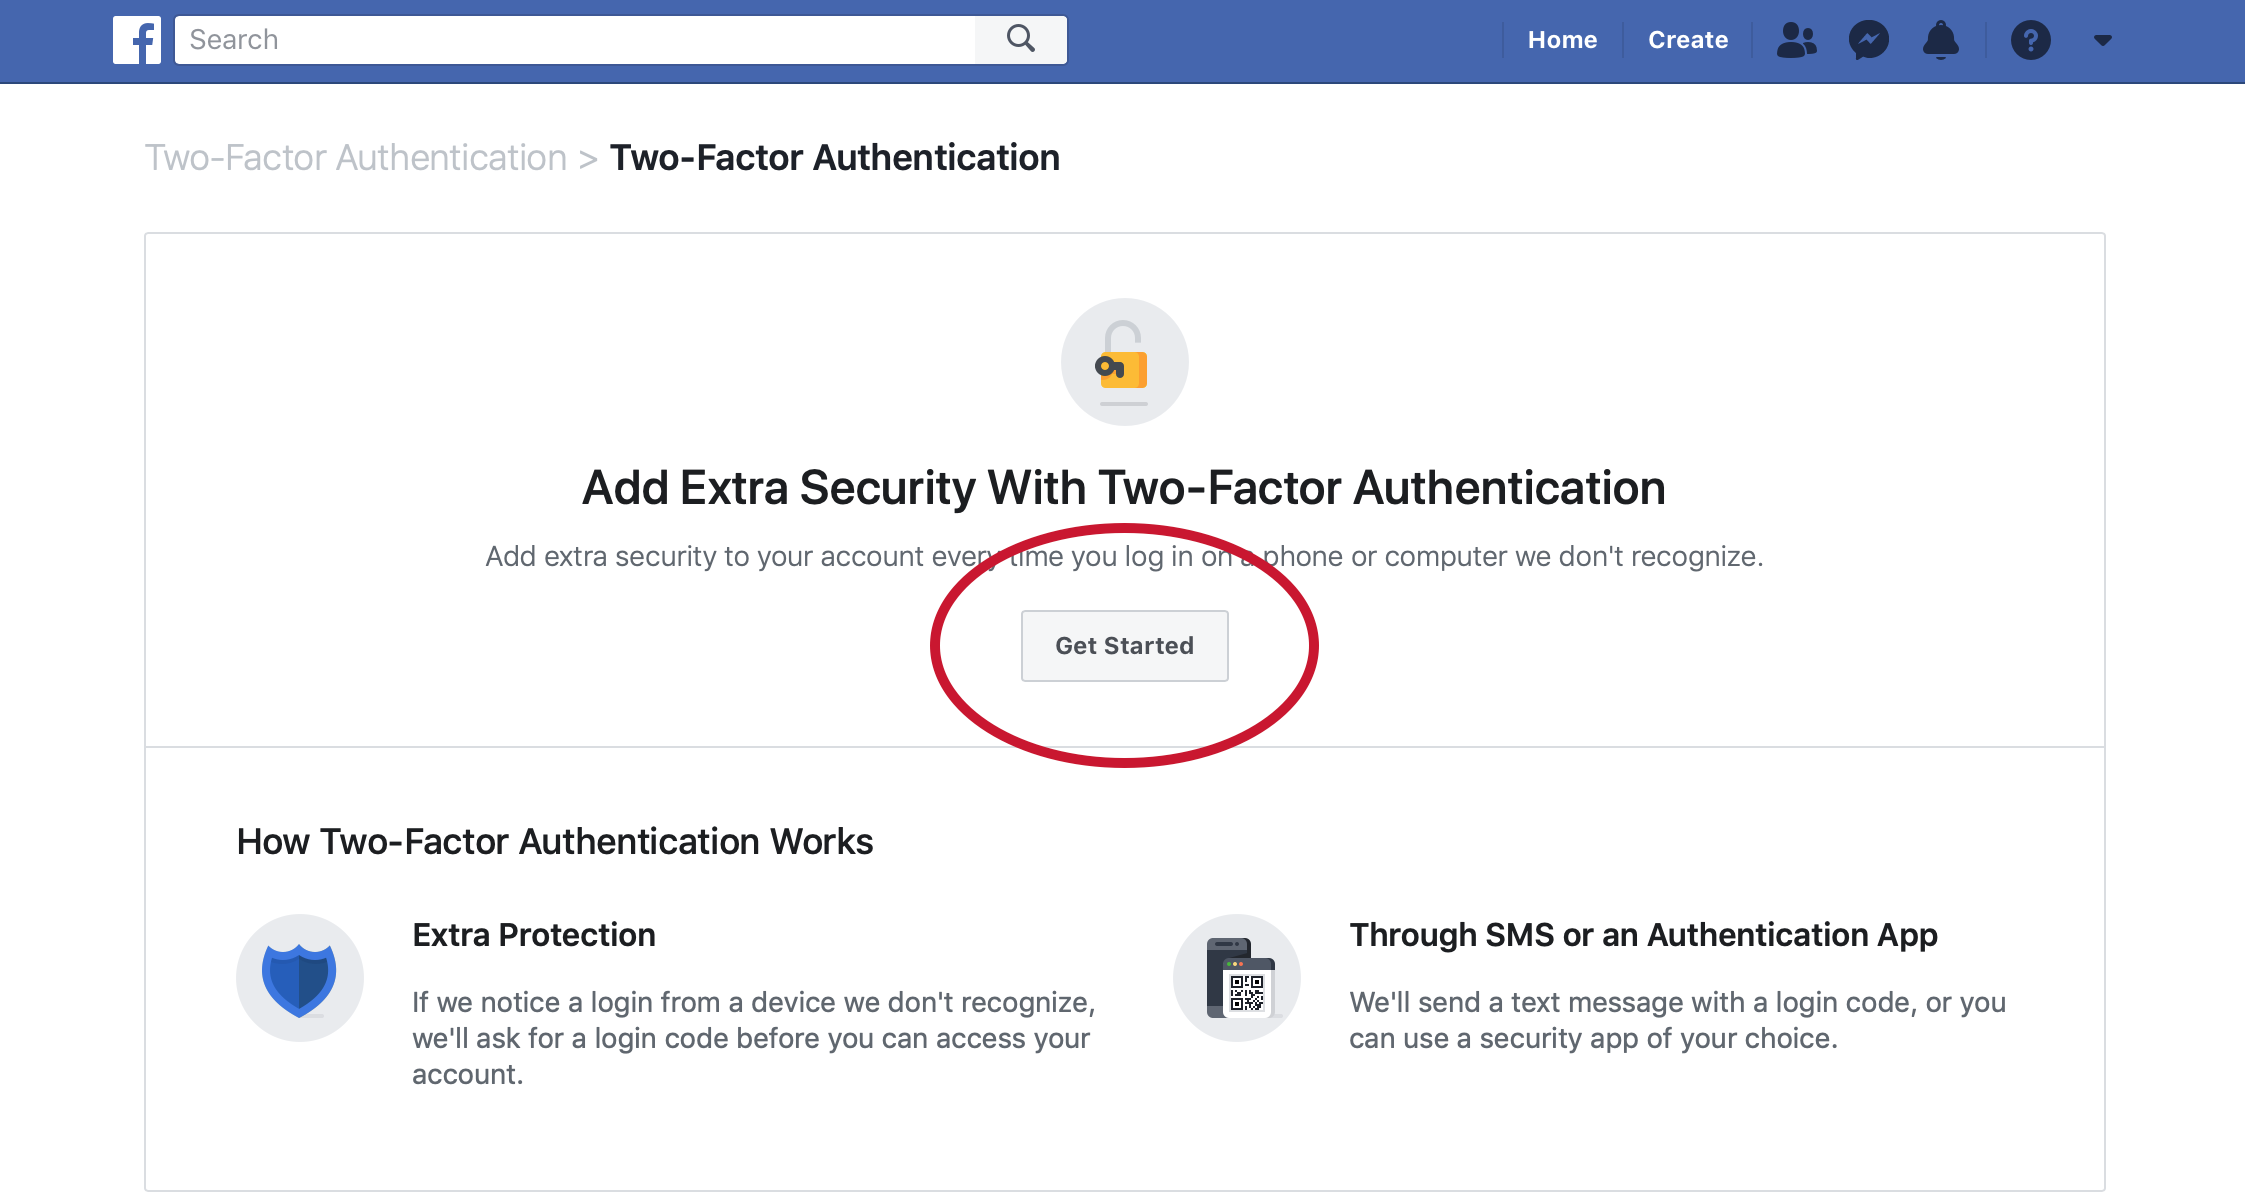 How to set up two-factor authentication for your Facebook account